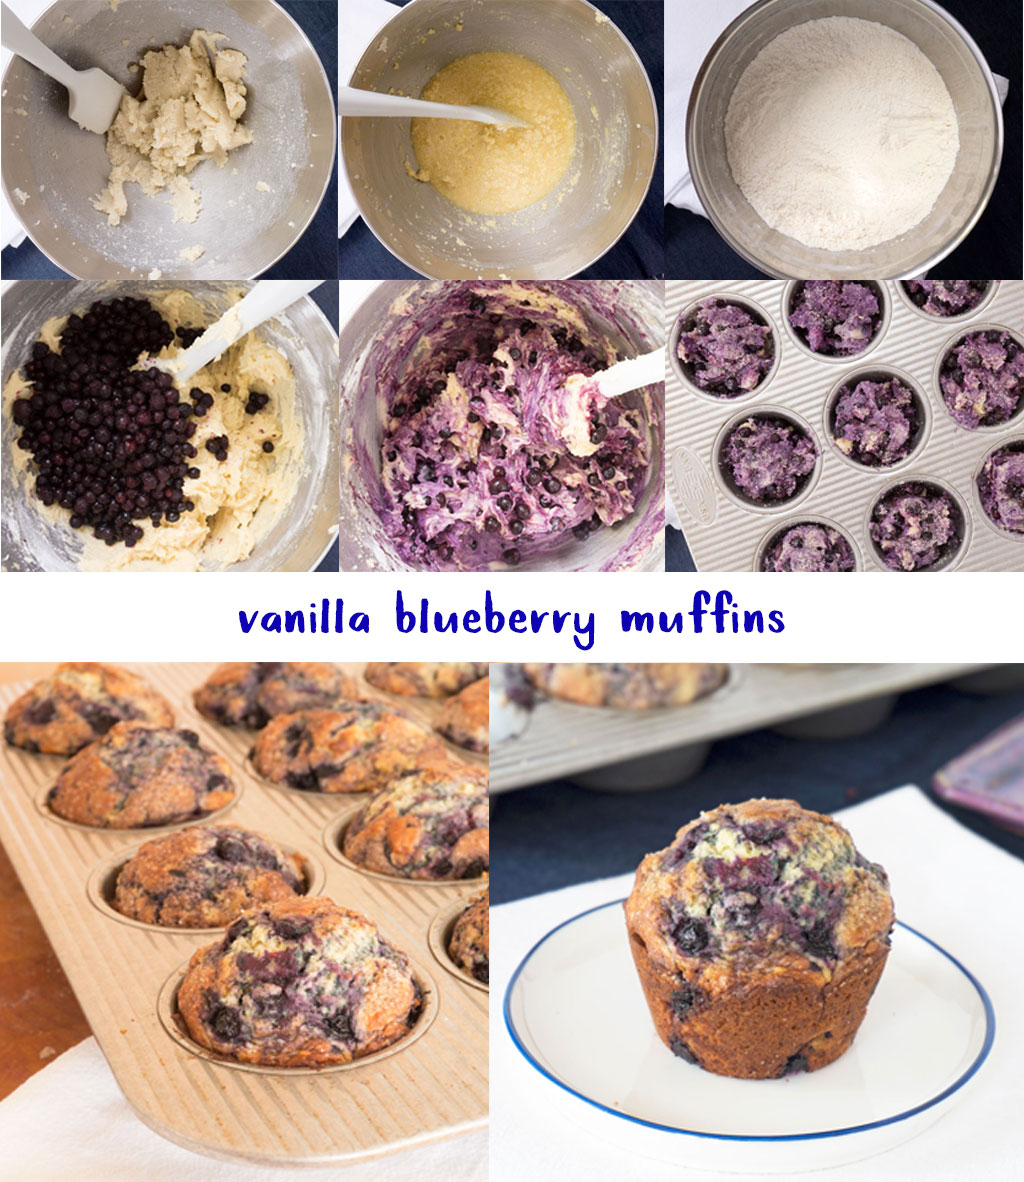 Step by Step Photos for How to Make Vanilla Blueberry Muffins